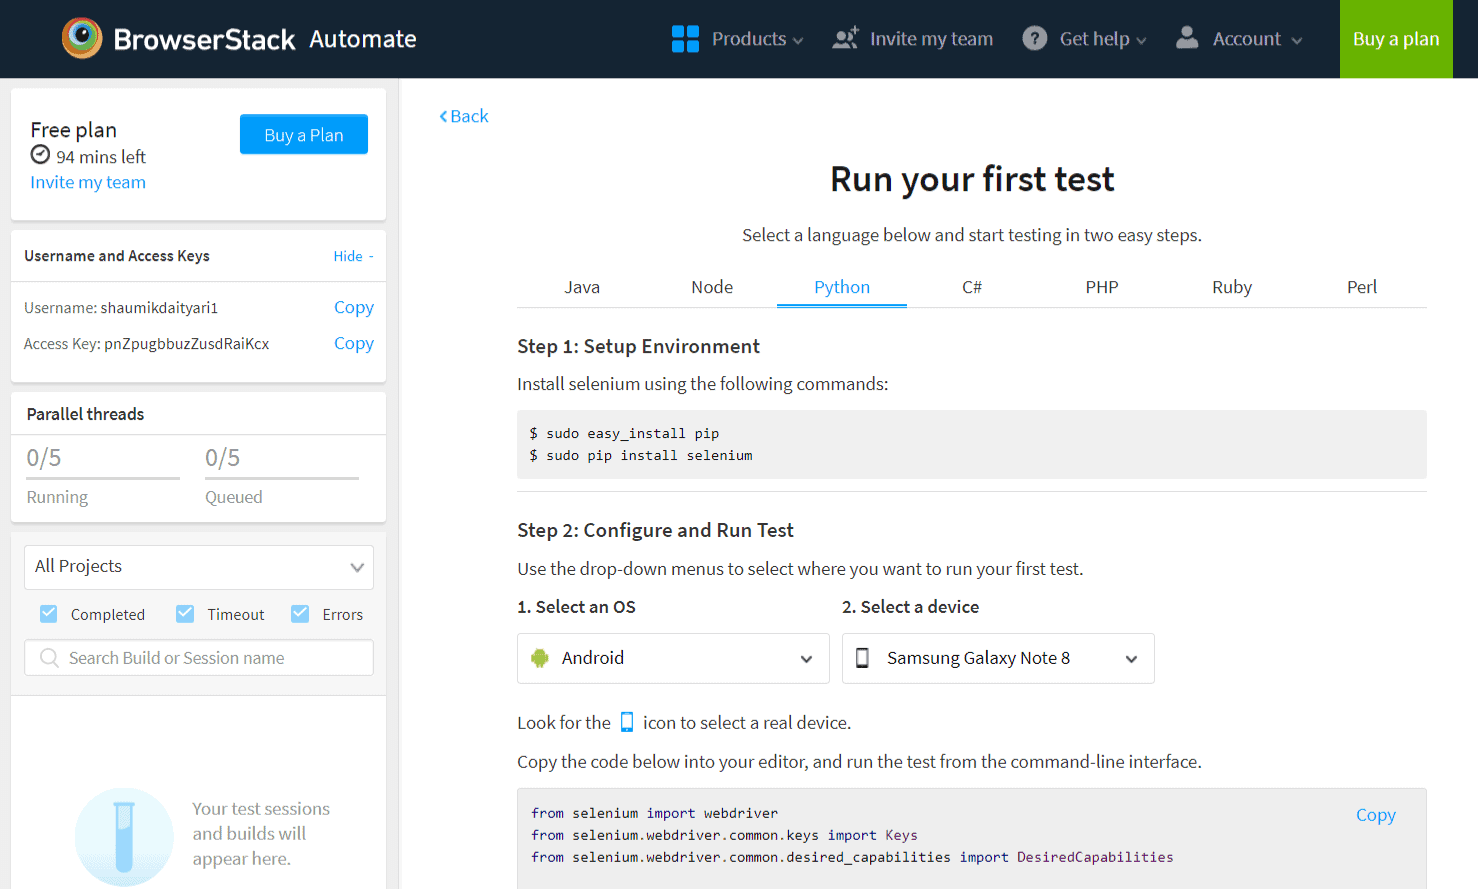 Setting up your first test on BrowserStack